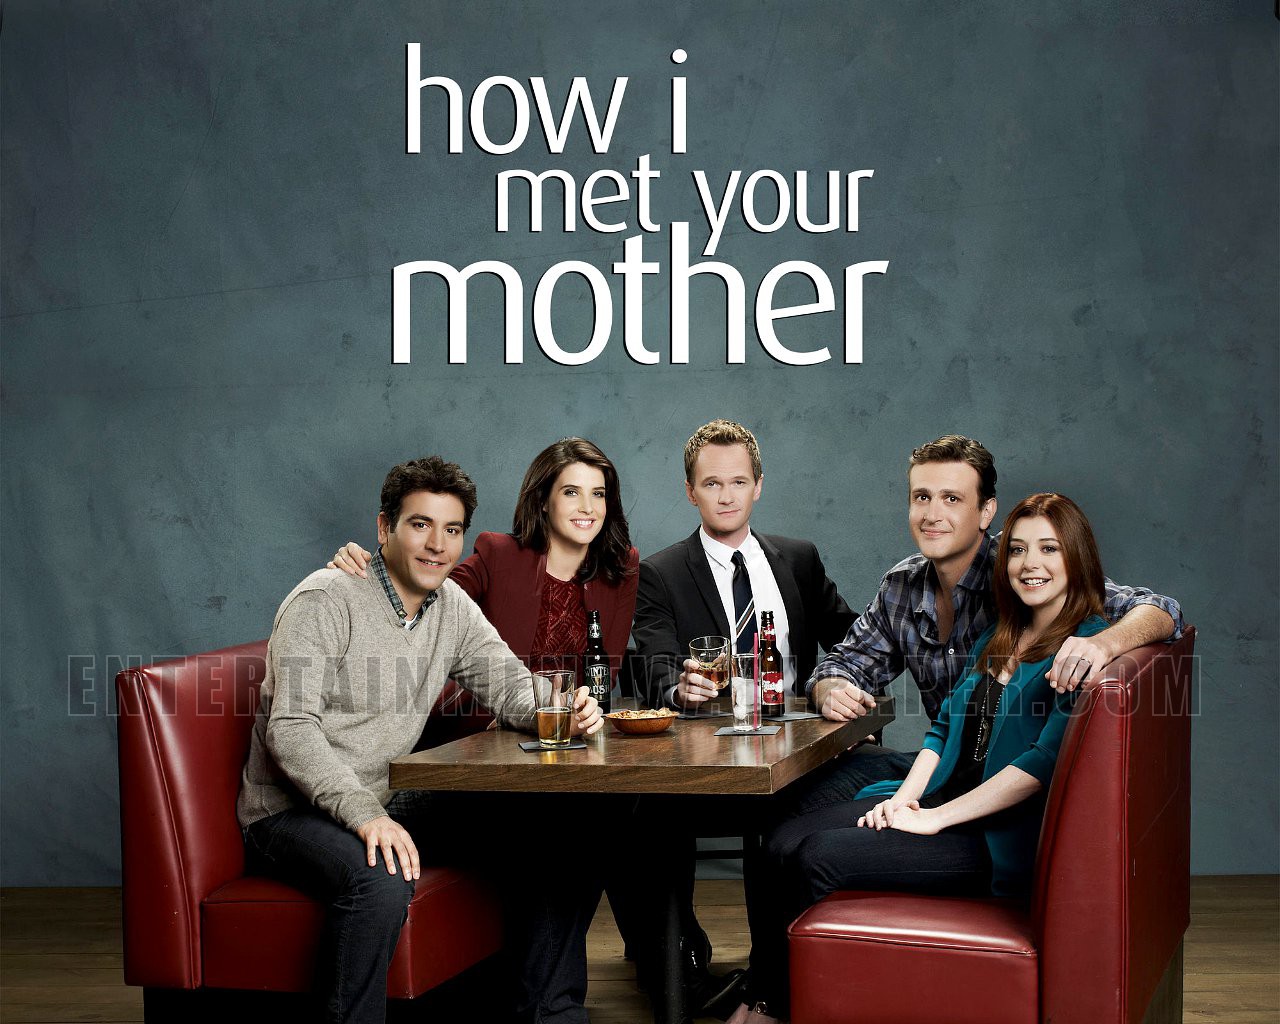 how i met your mother wallpaper,photograph,people,text,conversation,sitting